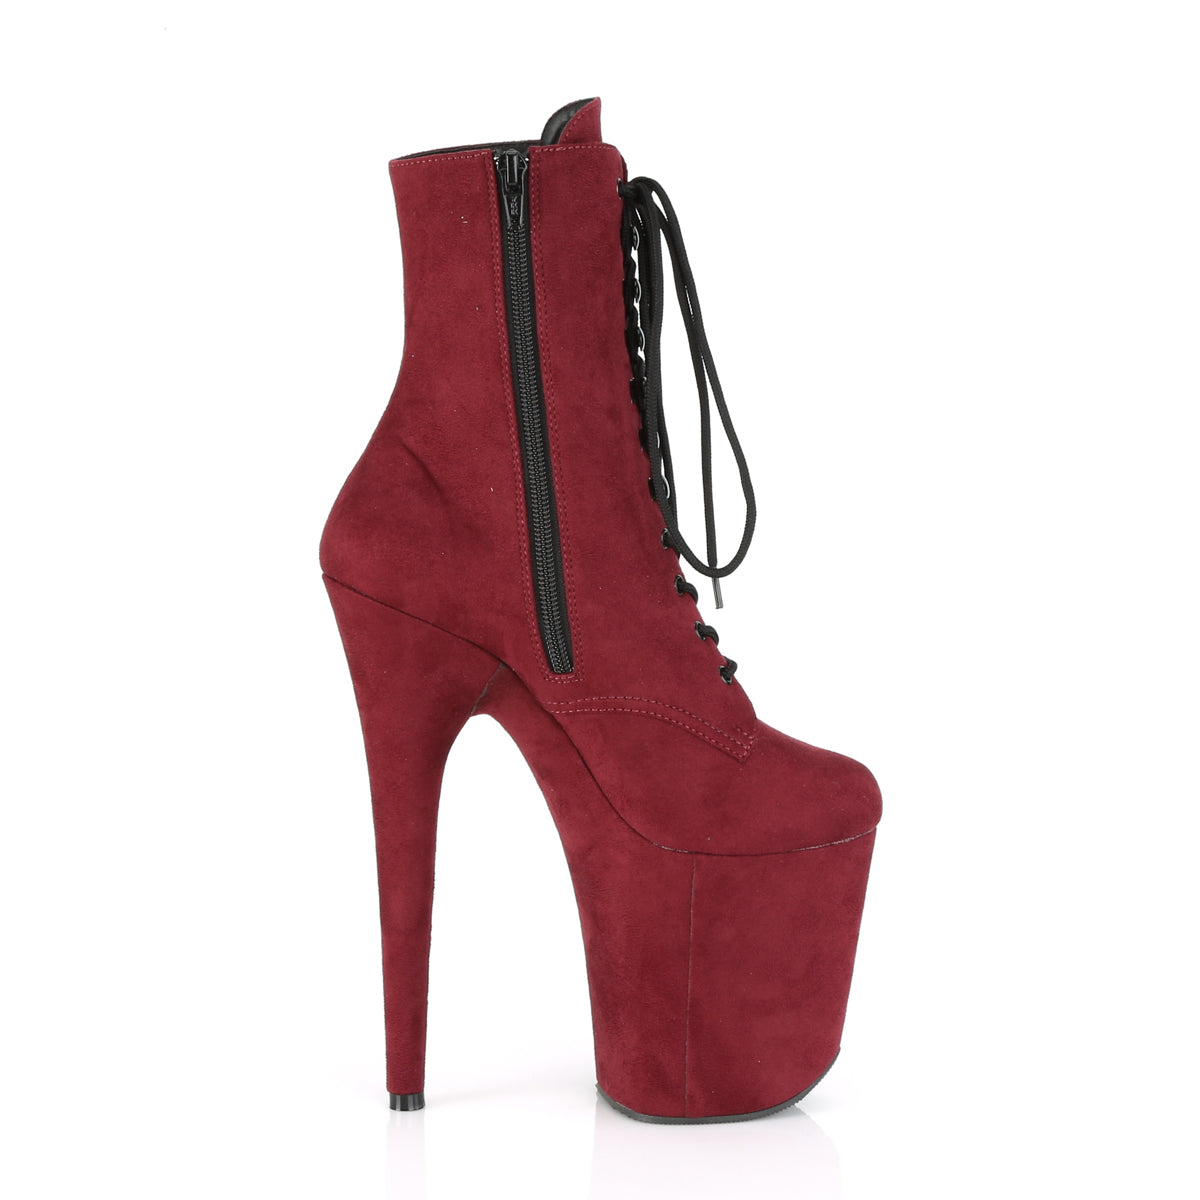 Pleaser Womens Ankle Boots FLAMINGO-1020FS Burgundy Faux Suede/Burgundy Faux Suede